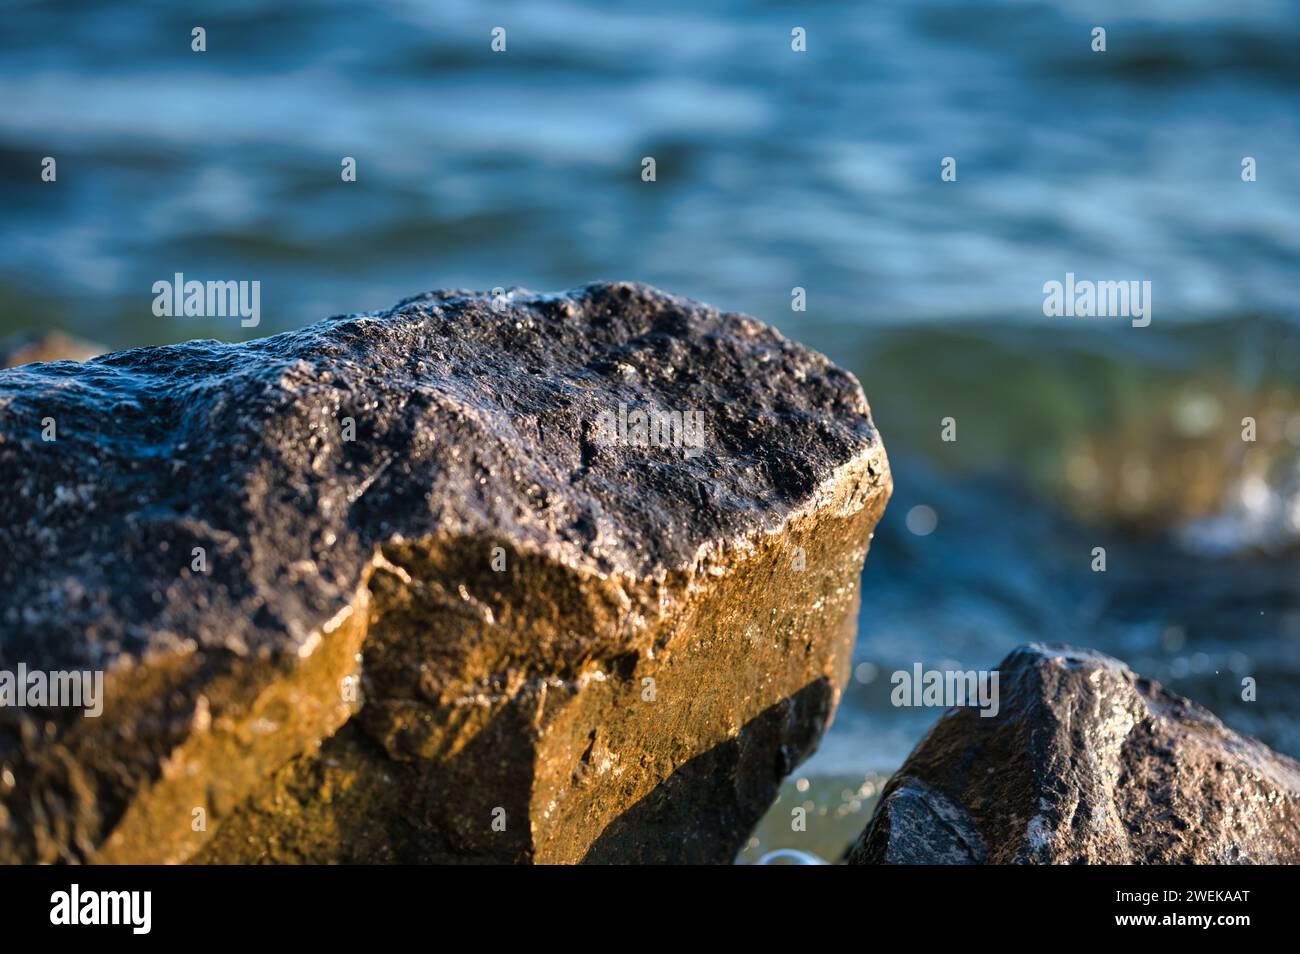 A serene view of two rocks at the water's edge Stock Photo